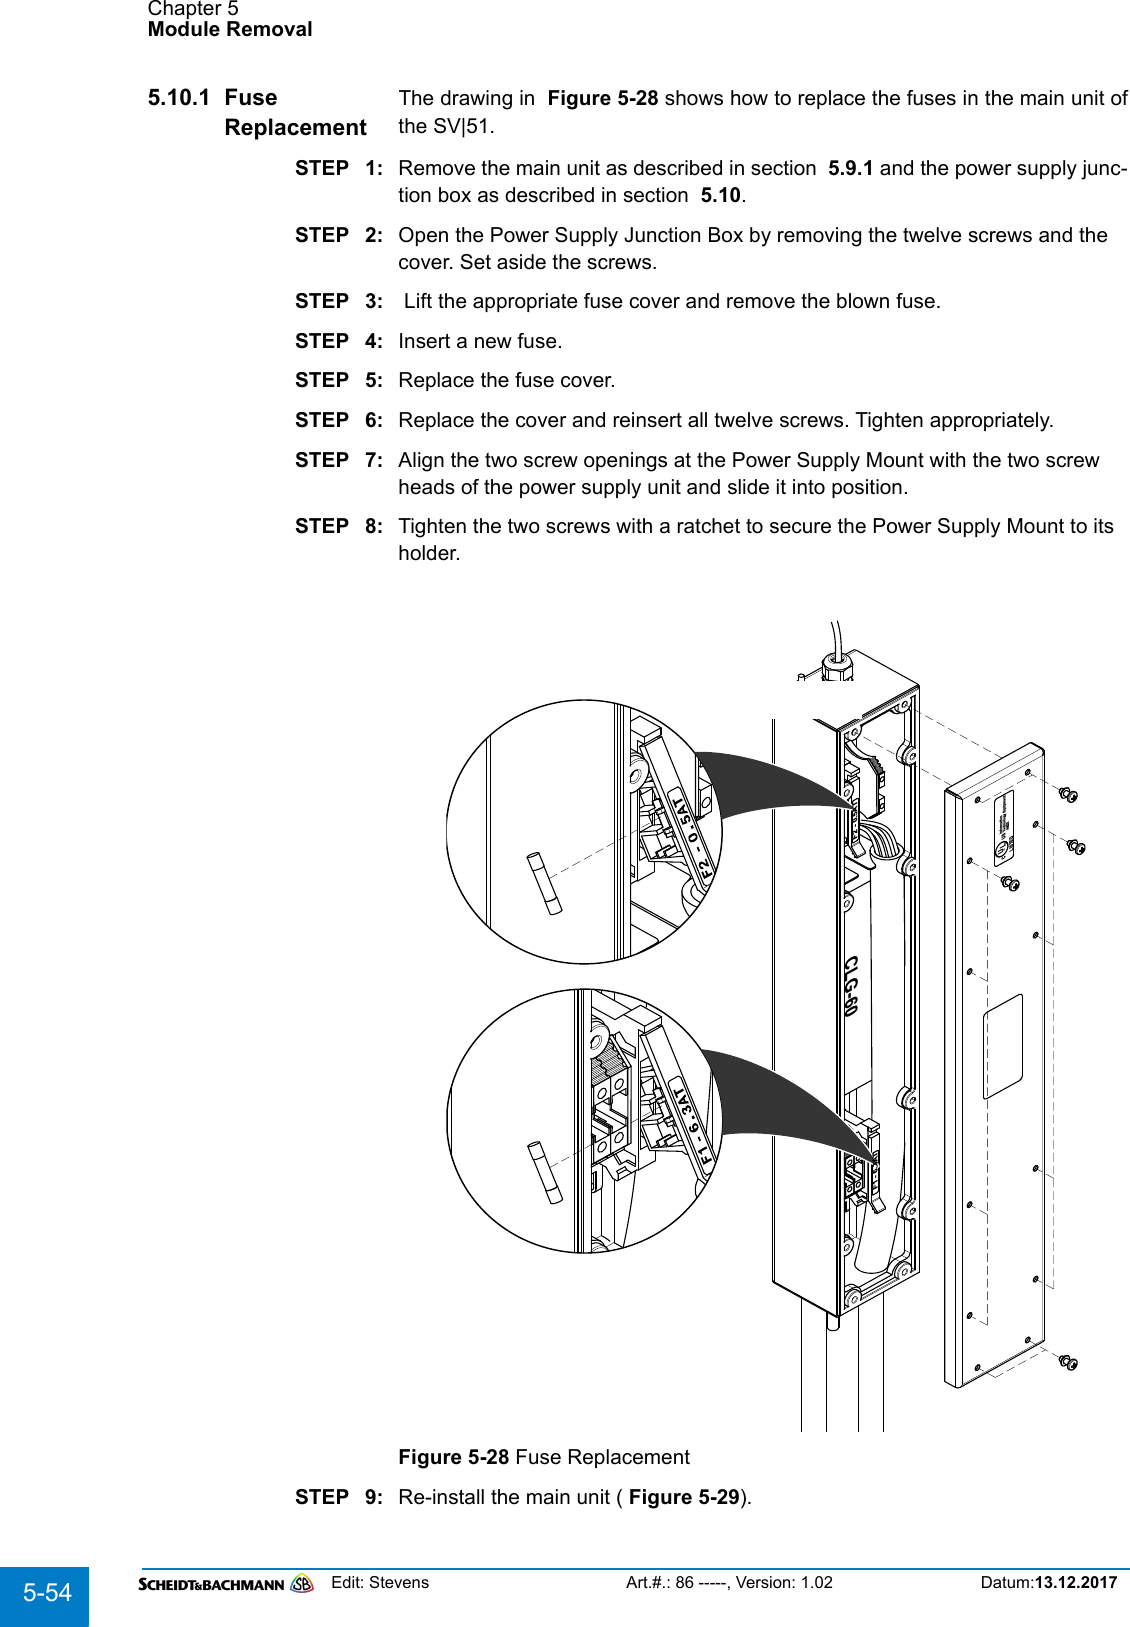 Chapter 5Module RemovalEdit: Stevens Art.#.: 86 -----, Version: 1.02 Datum:13.12.20175-545.10.1 Fuse ReplacementThe drawing in  Figure 5-28 shows how to replace the fuses in the main unit ofthe SV|51.STEP 1: Remove the main unit as described in section  5.9.1 and the power supply junc-tion box as described in section  5.10.STEP 2: Open the Power Supply Junction Box by removing the twelve screws and the cover. Set aside the screws.STEP 3:  Lift the appropriate fuse cover and remove the blown fuse.STEP 4: Insert a new fuse.STEP 5: Replace the fuse cover.STEP 6: Replace the cover and reinsert all twelve screws. Tighten appropriately.STEP 7: Align the two screw openings at the Power Supply Mount with the two screw heads of the power supply unit and slide it into position.STEP 8: Tighten the two screws with a ratchet to secure the Power Supply Mount to its holder.Figure 5-28 Fuse ReplacementSTEP 9: Re-install the main unit ( Figure 5-29).InformationTechnology Equipment4NZ5LISTEDUSCURLCLG-60F2 - 0.5ATF1 - 6.3AT